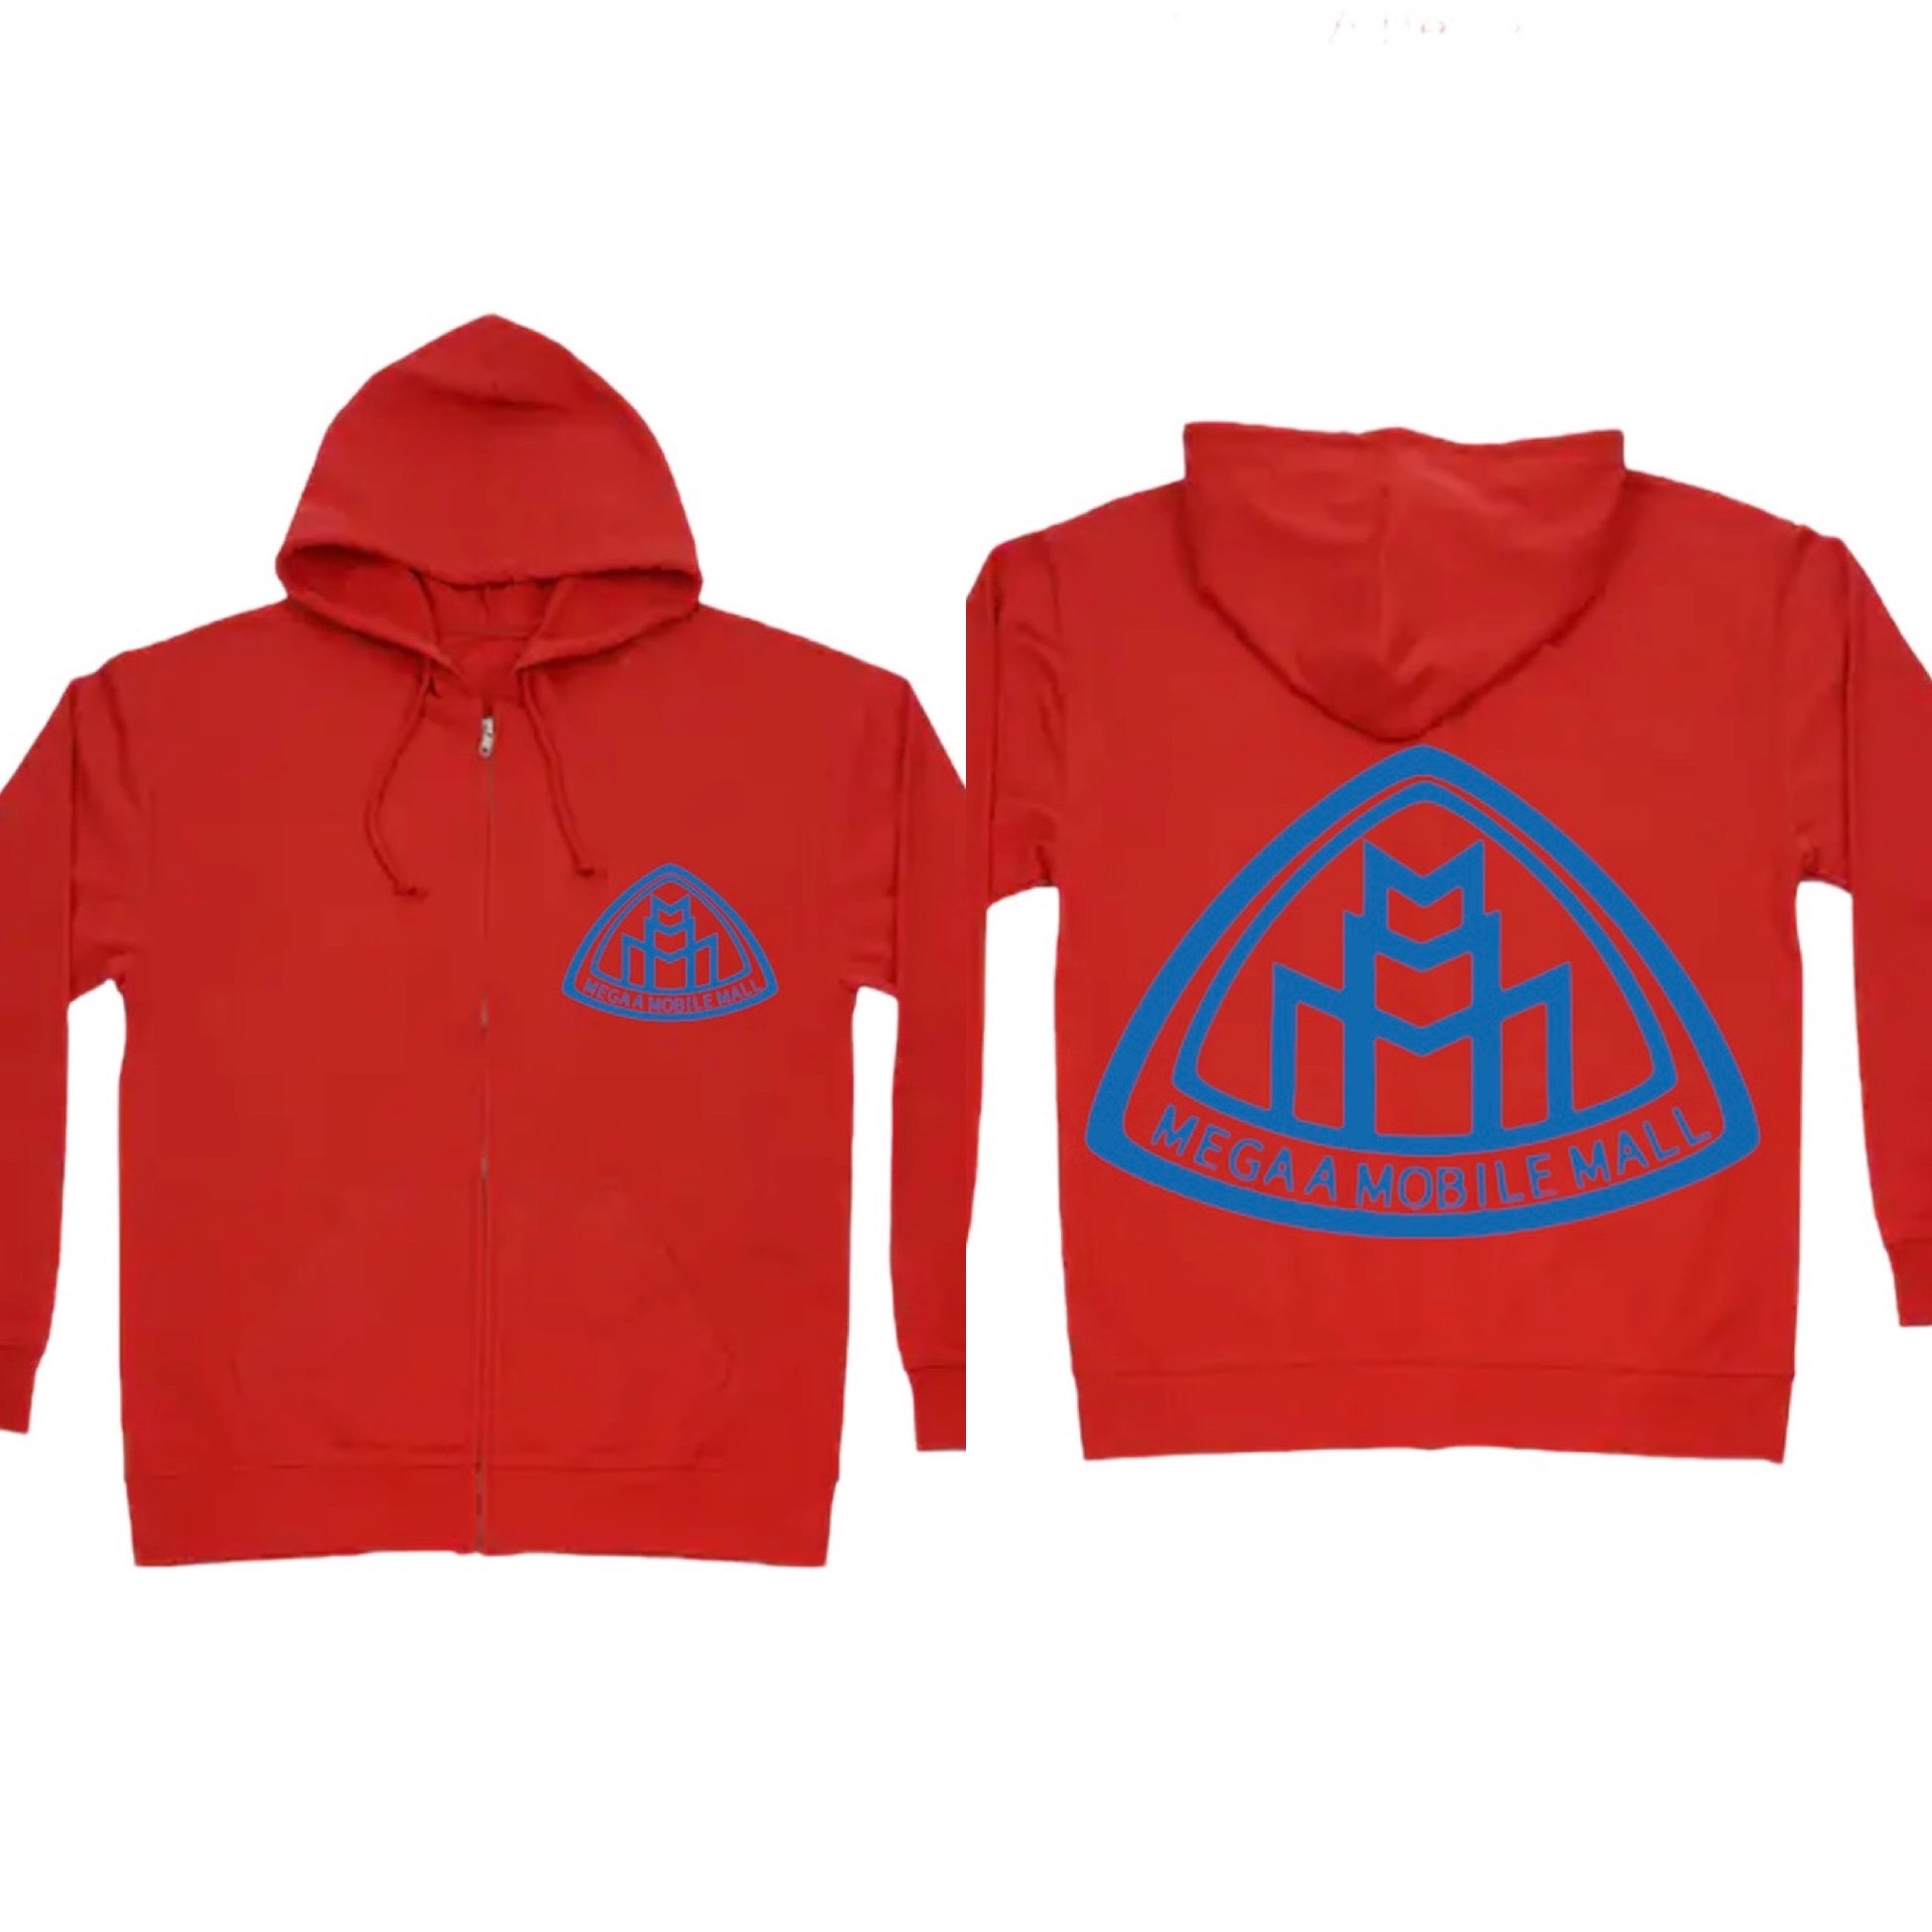 megaamobilemall red zip up hoodie with blue logo